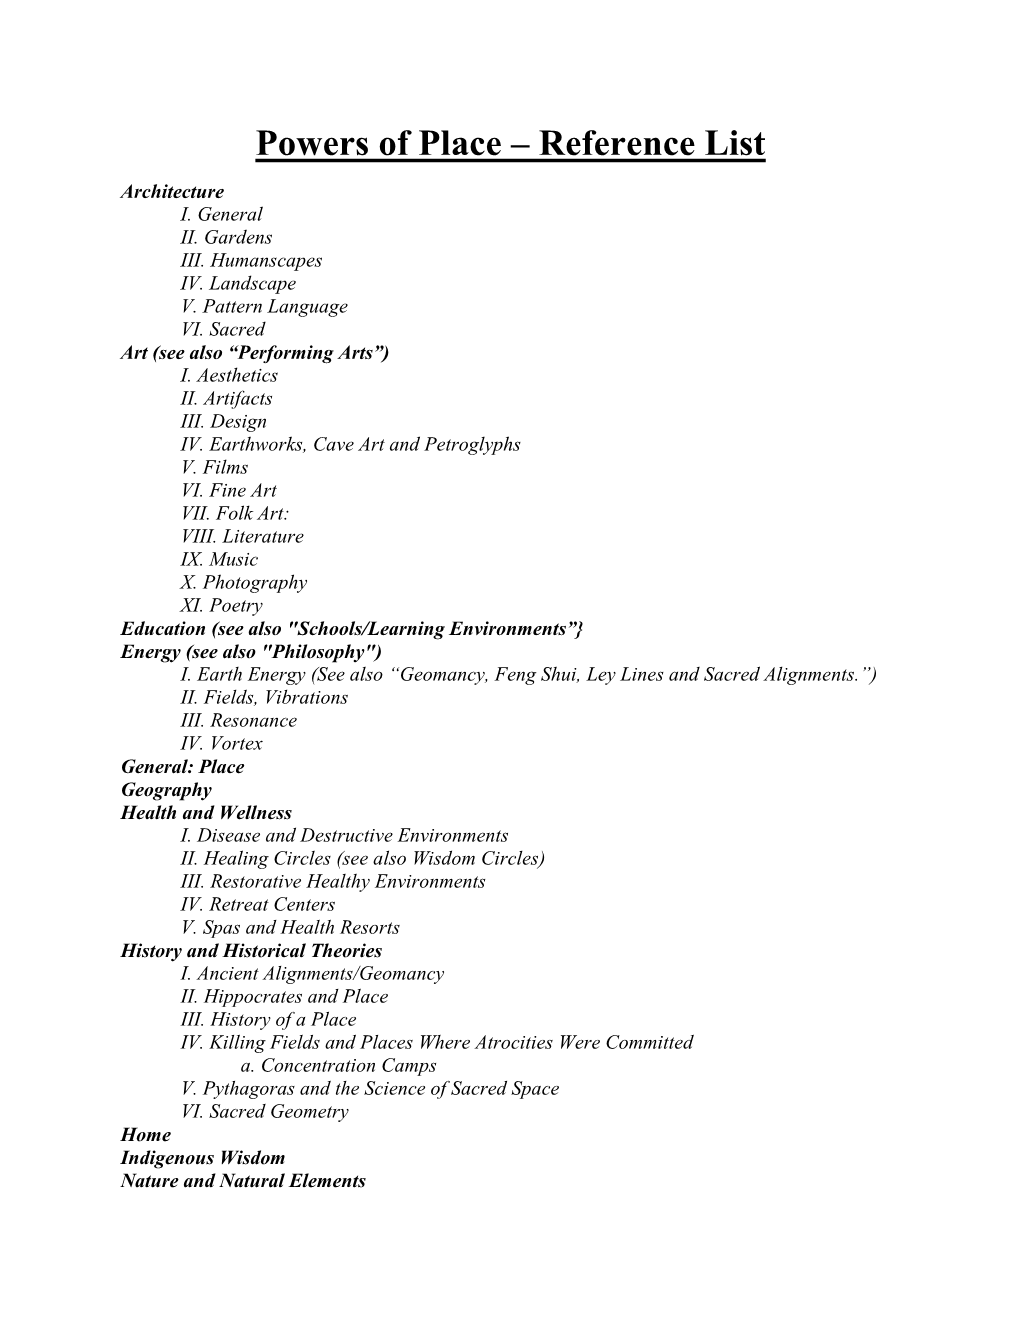 Reference List Architecture I